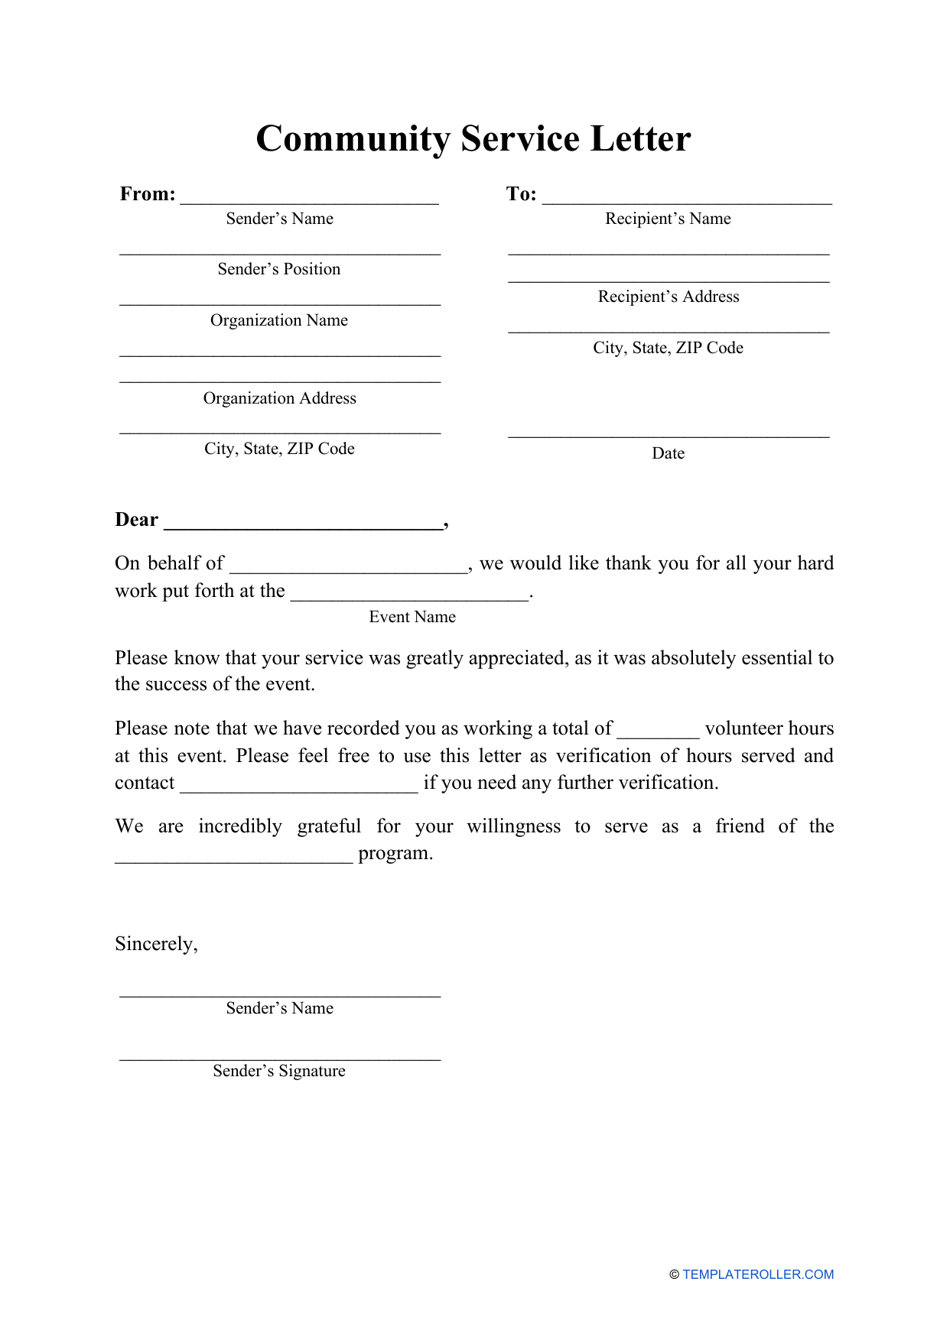 Community Service Letter Template Download Printable PDF Templateroller